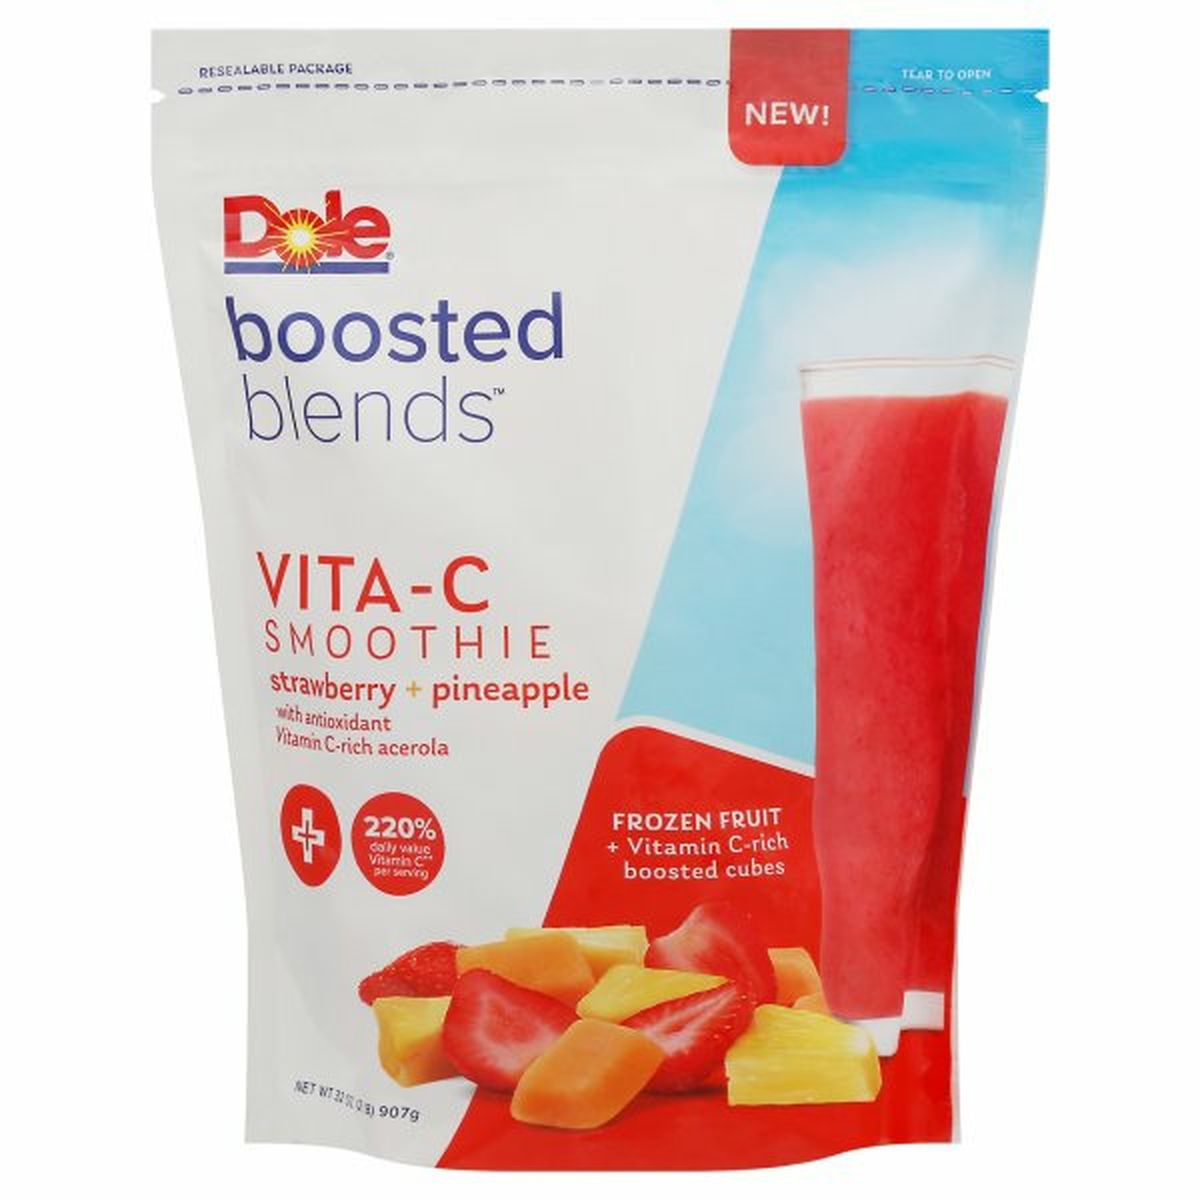 Calories in Dole Boosted Blends Vita-C Smoothie, Strawberry + Pineapple